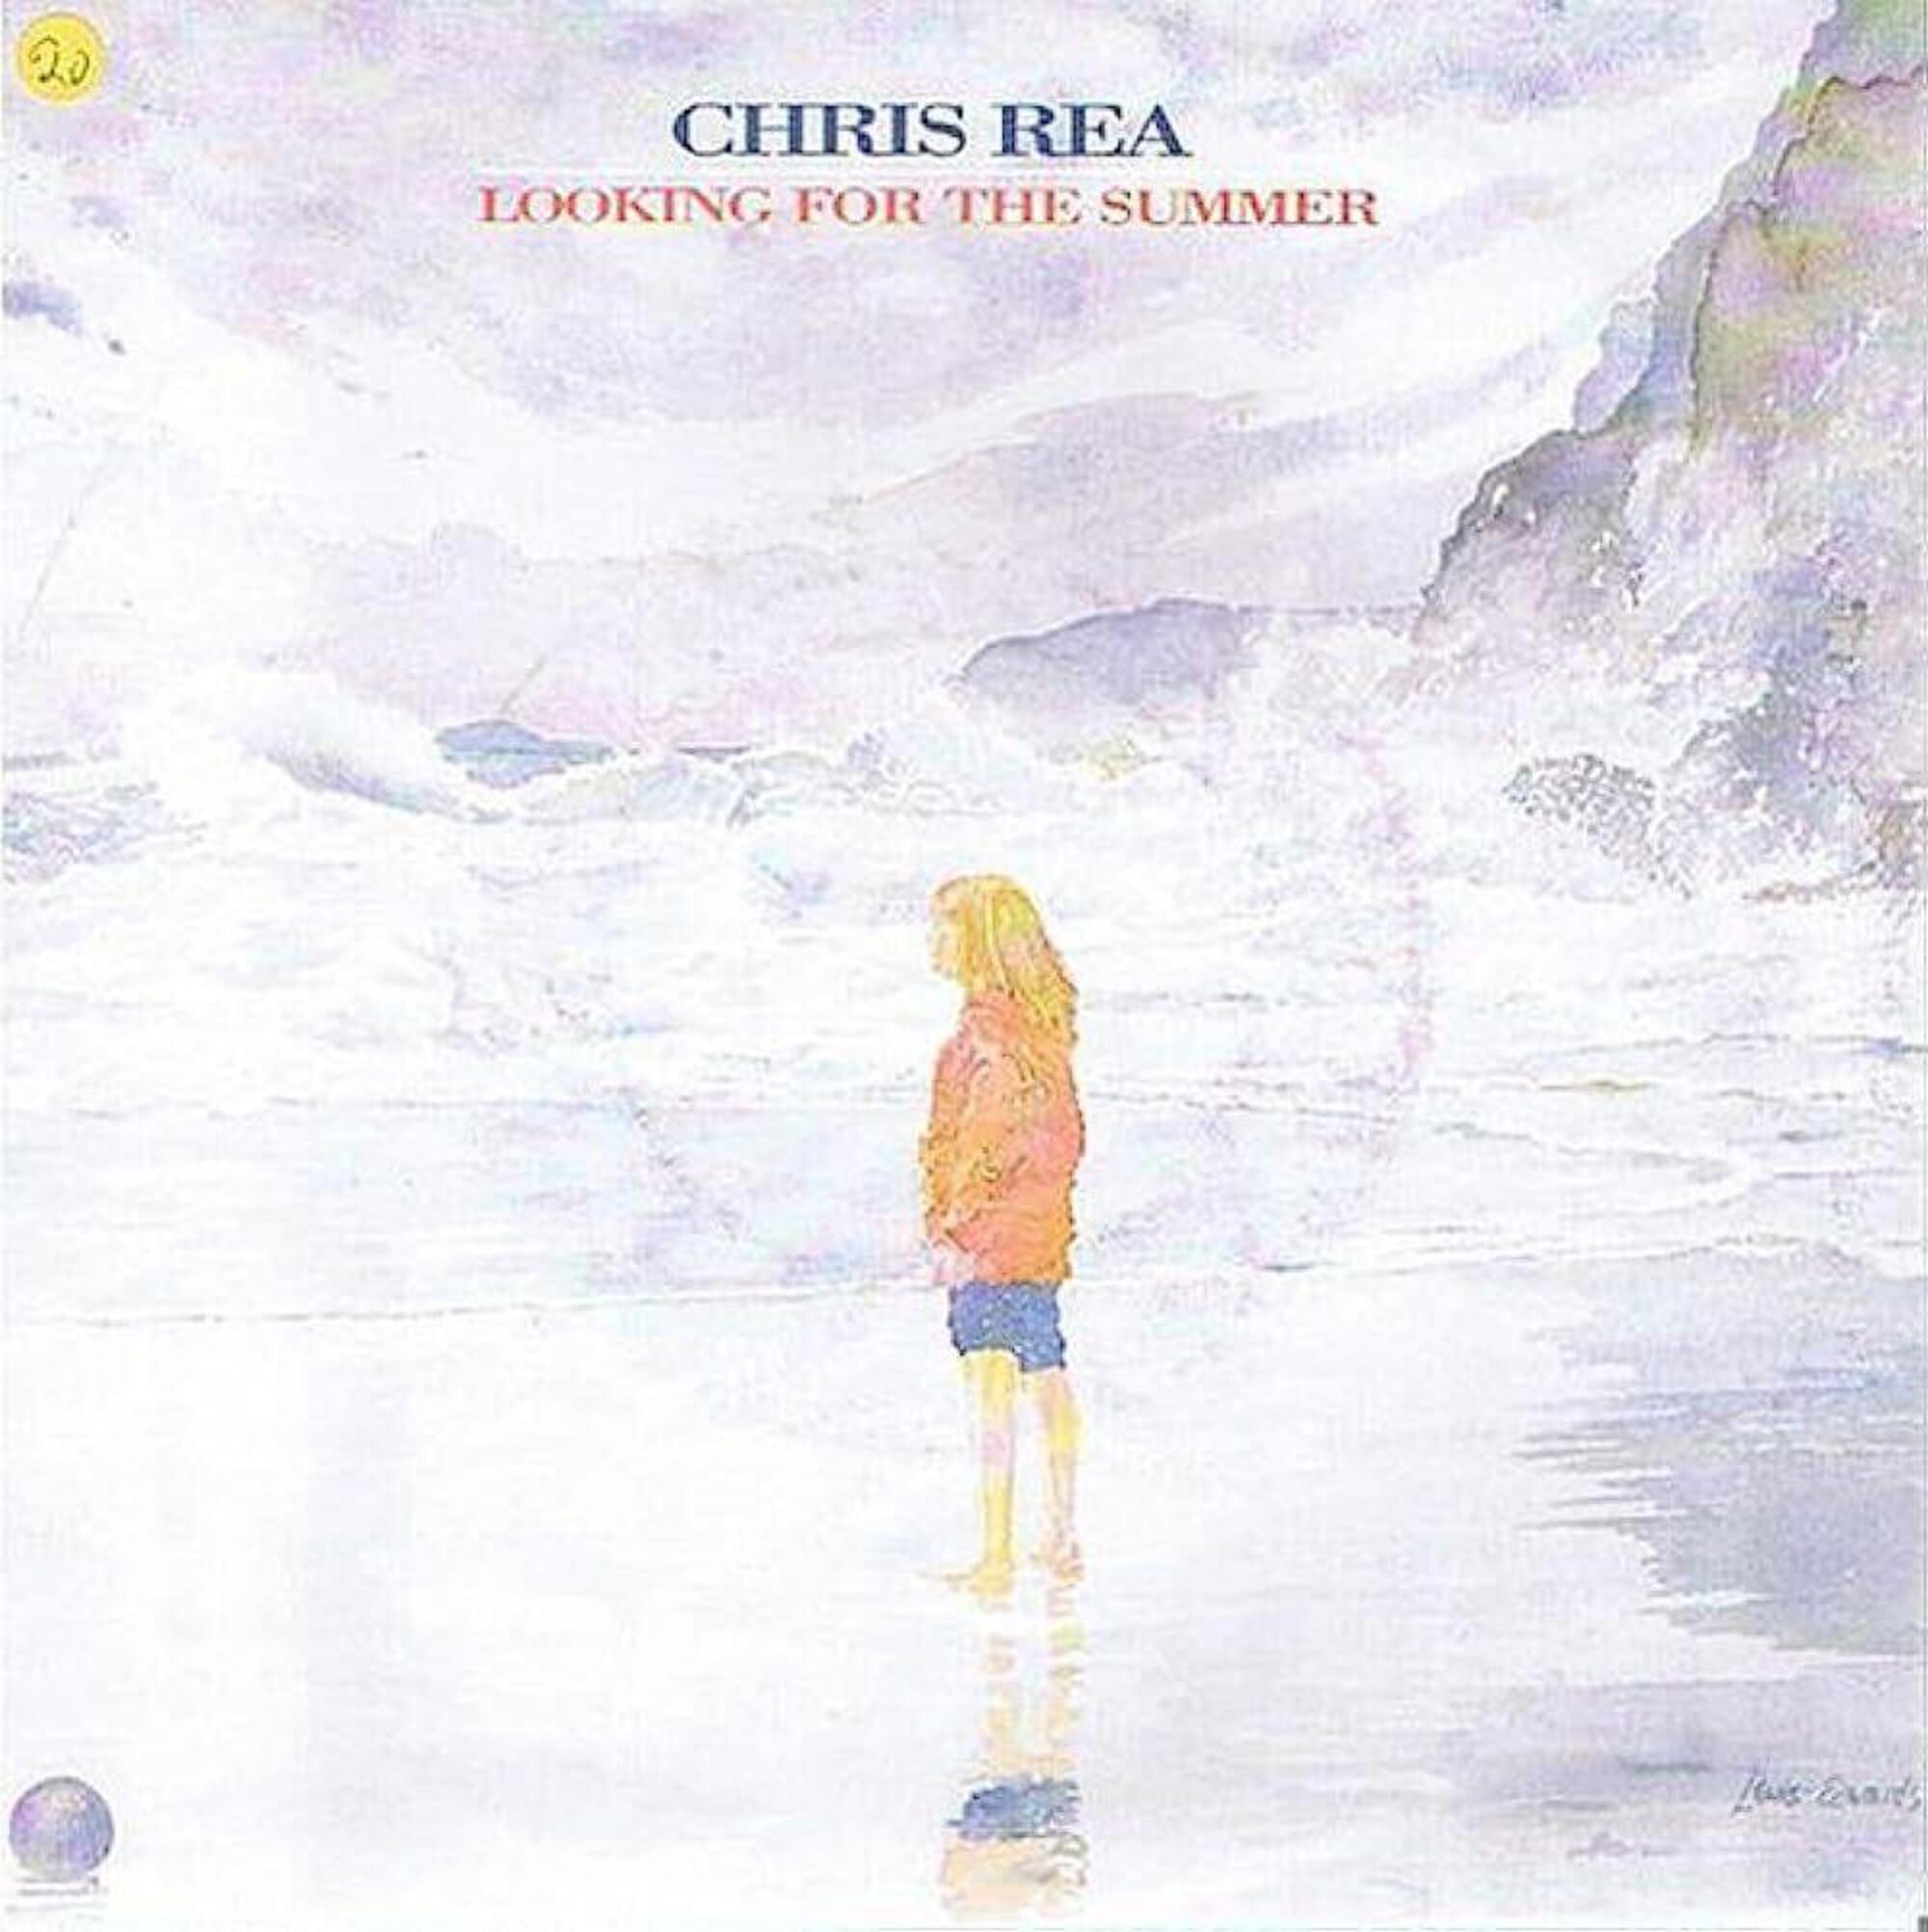 LOOKING FOR THE SUMMER Chris Rea 1991